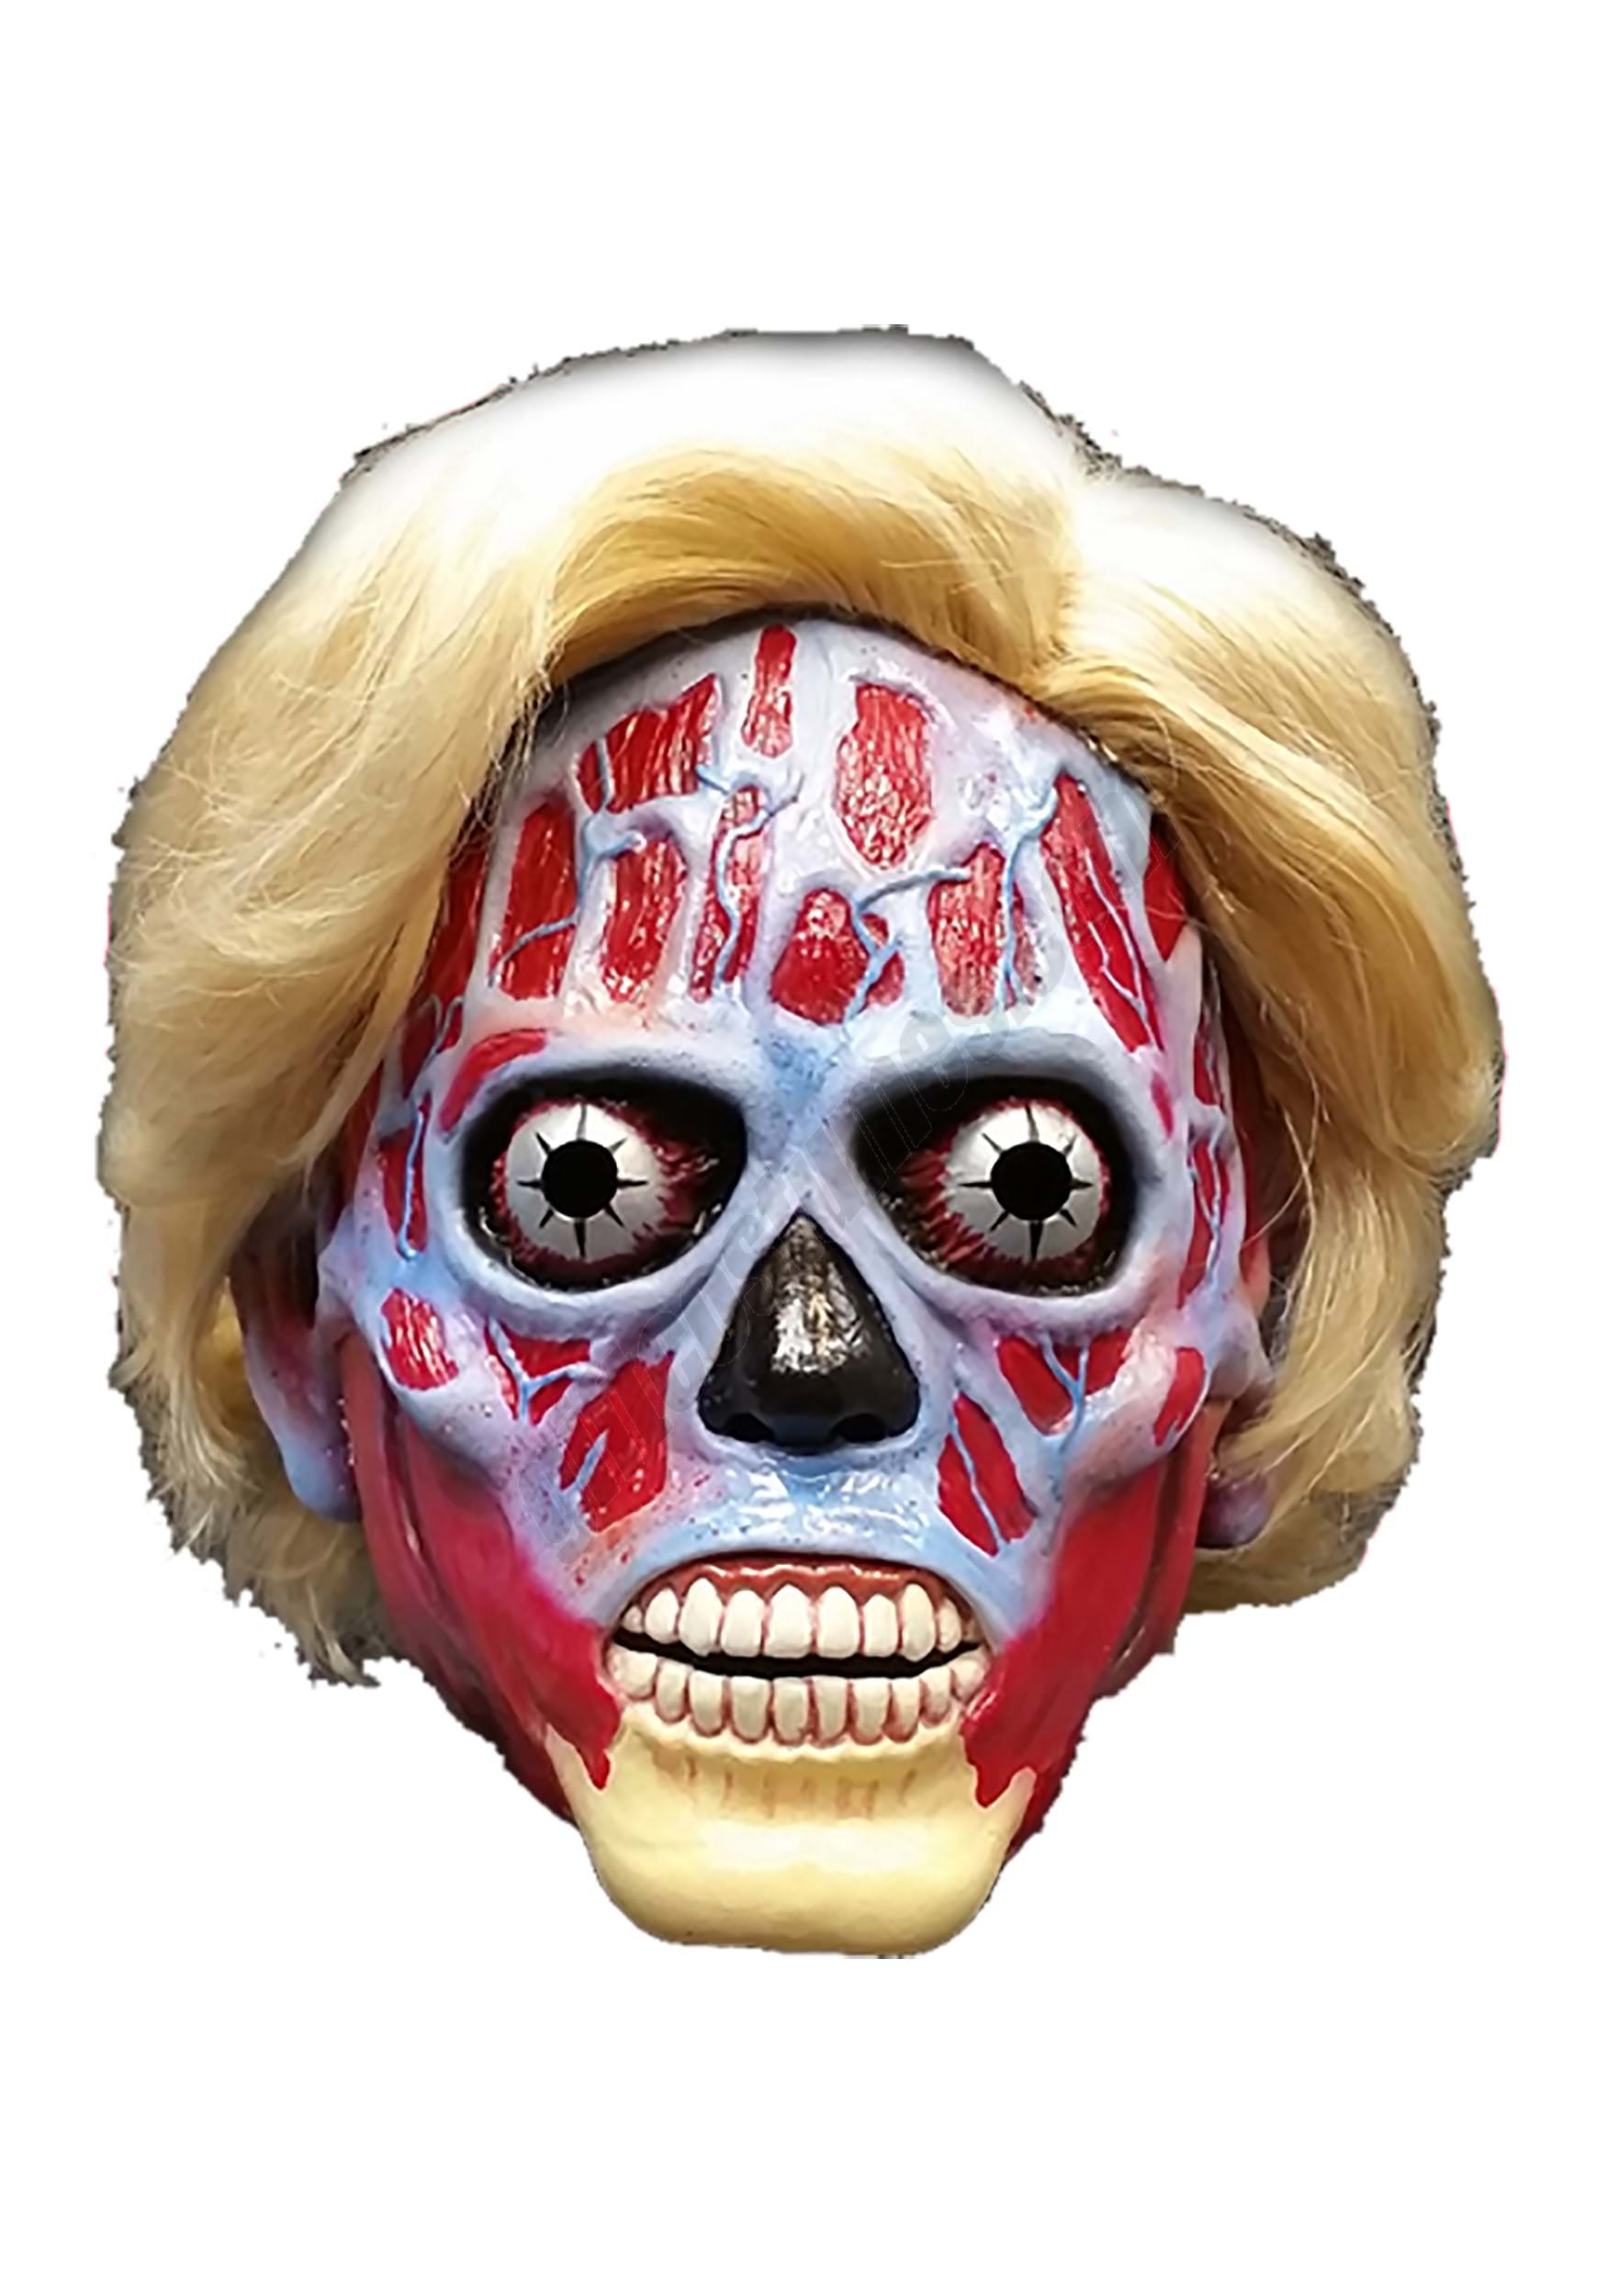 They Live Female Alien Movie Mask Promotions - They Live Female Alien Movie Mask Promotions